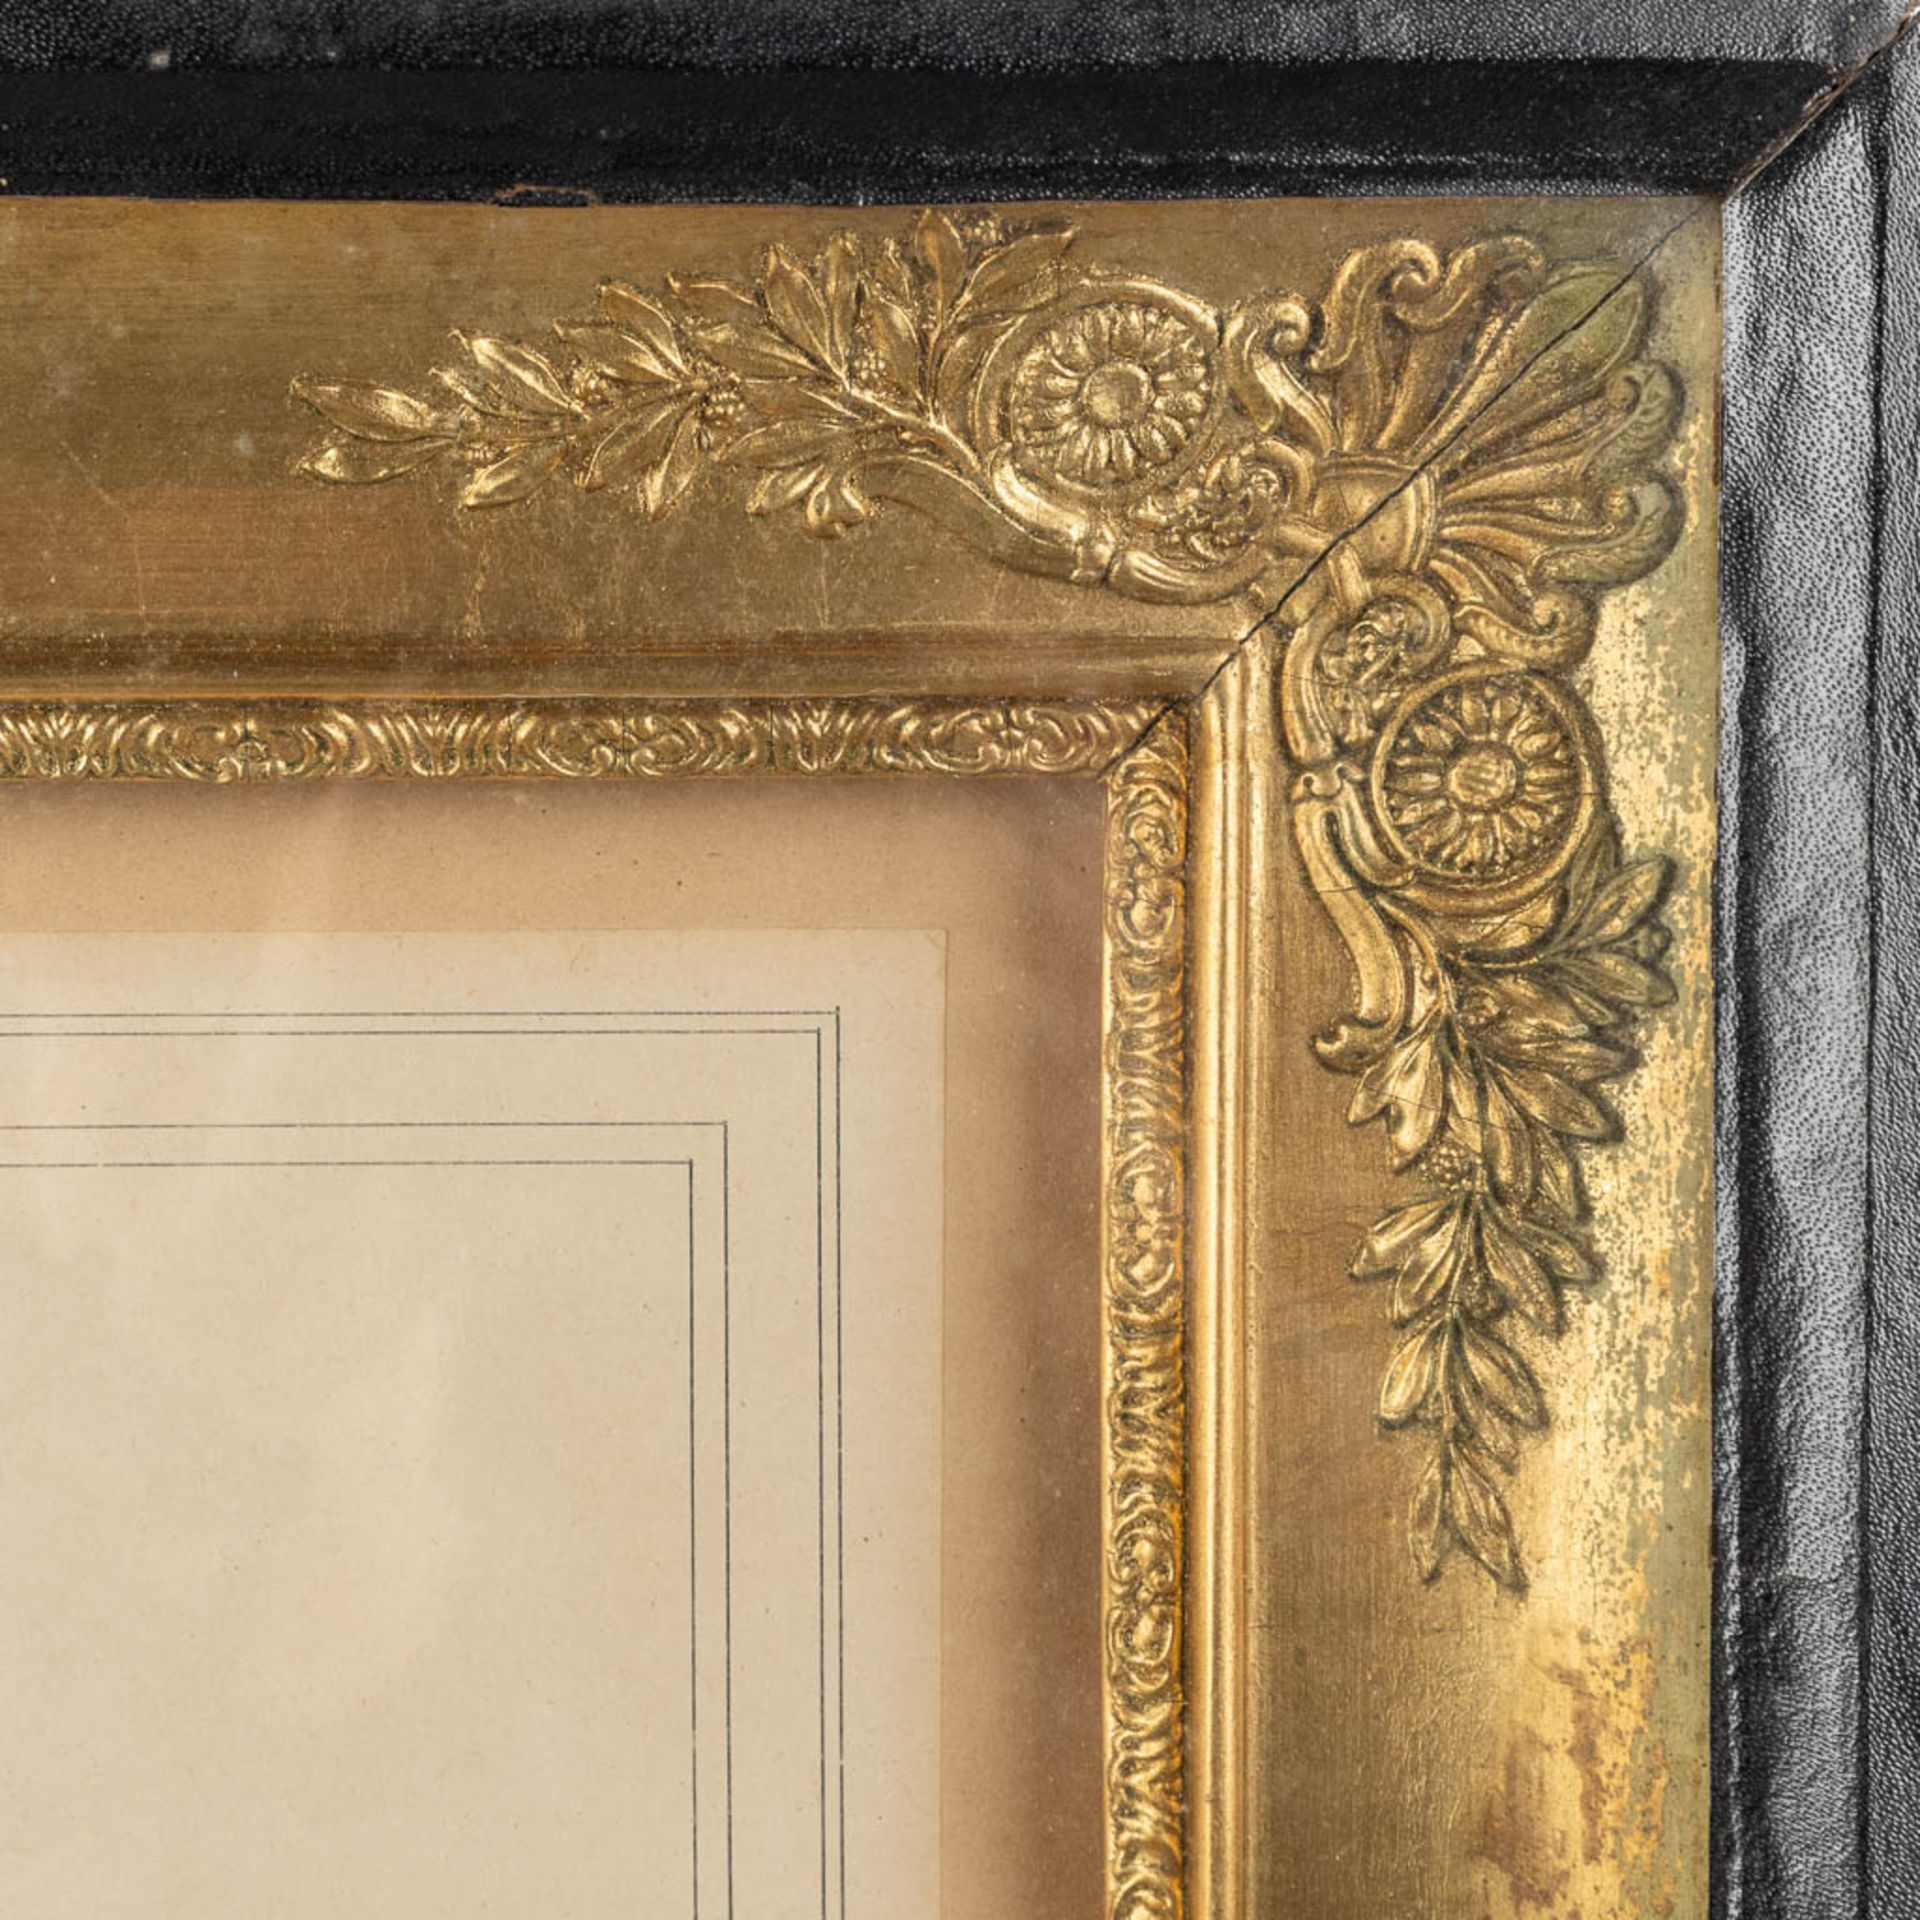 A pair of frames with lithographies, framed in an empire frame. 19th C. (W:59 x H:49 cm) - Bild 9 aus 21